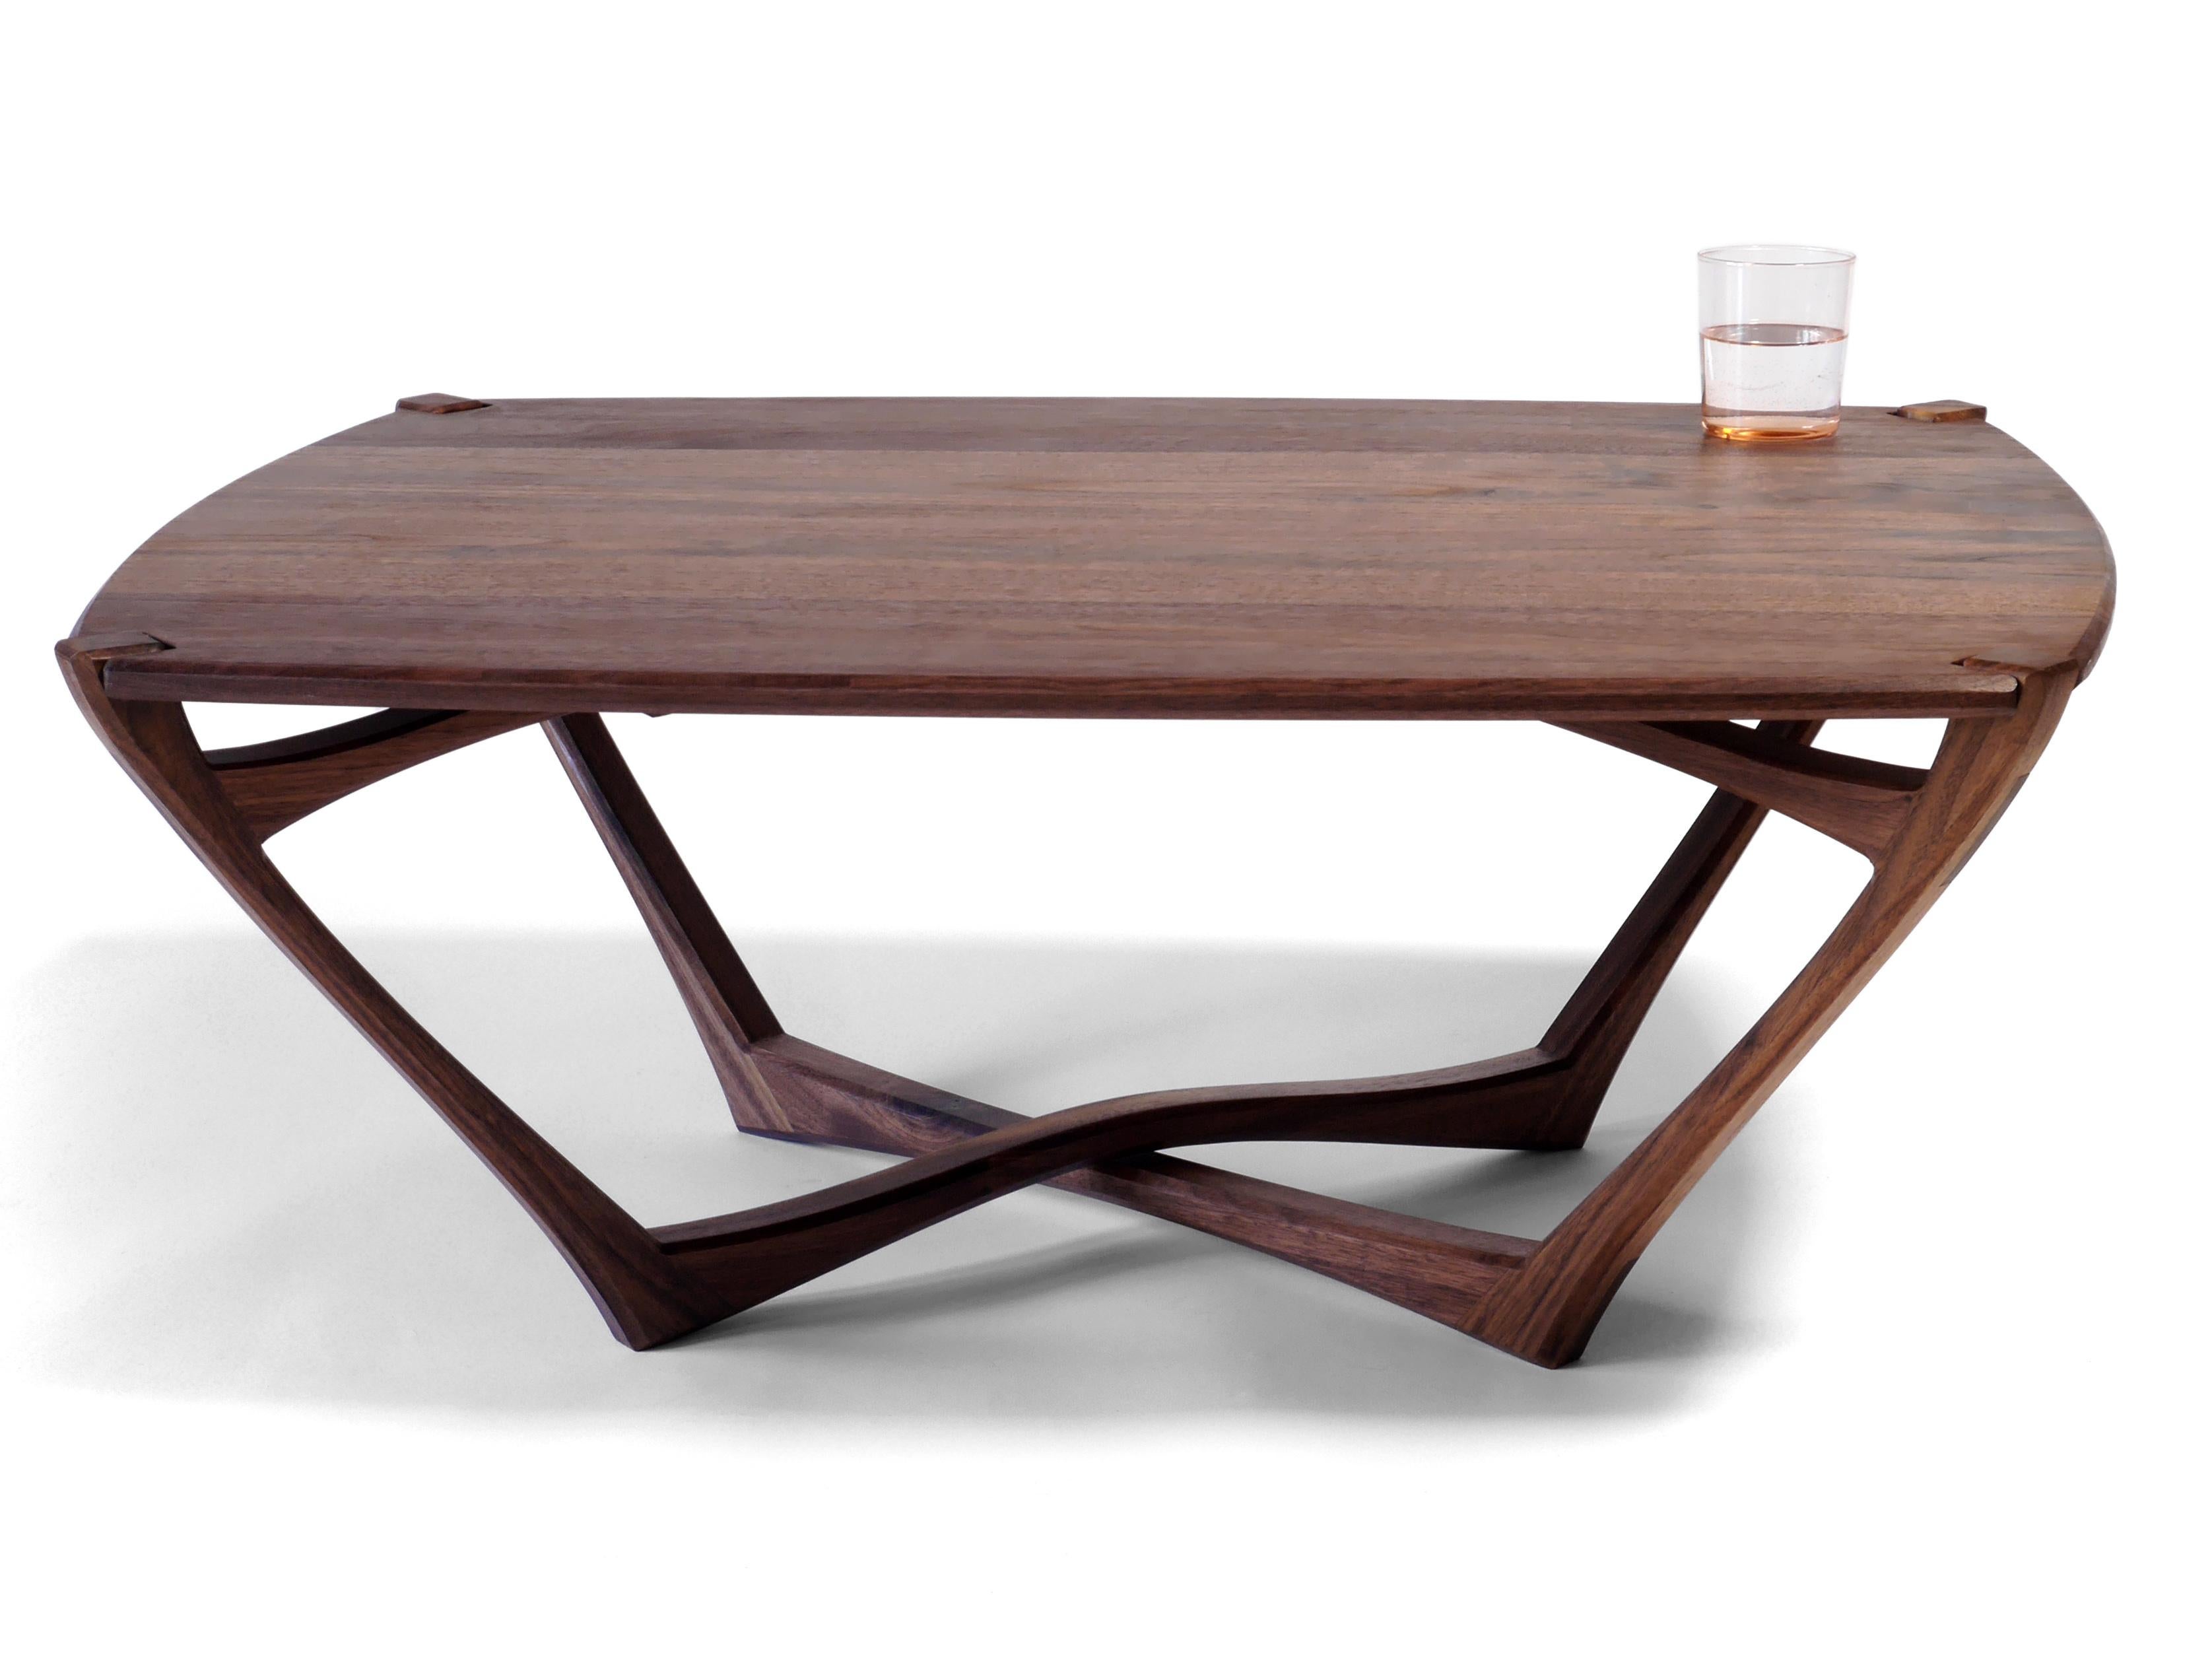 Hand-Crafted Walnut Mistral Coffee Table, Modern Sculptural Living Room Table by Arid For Sale